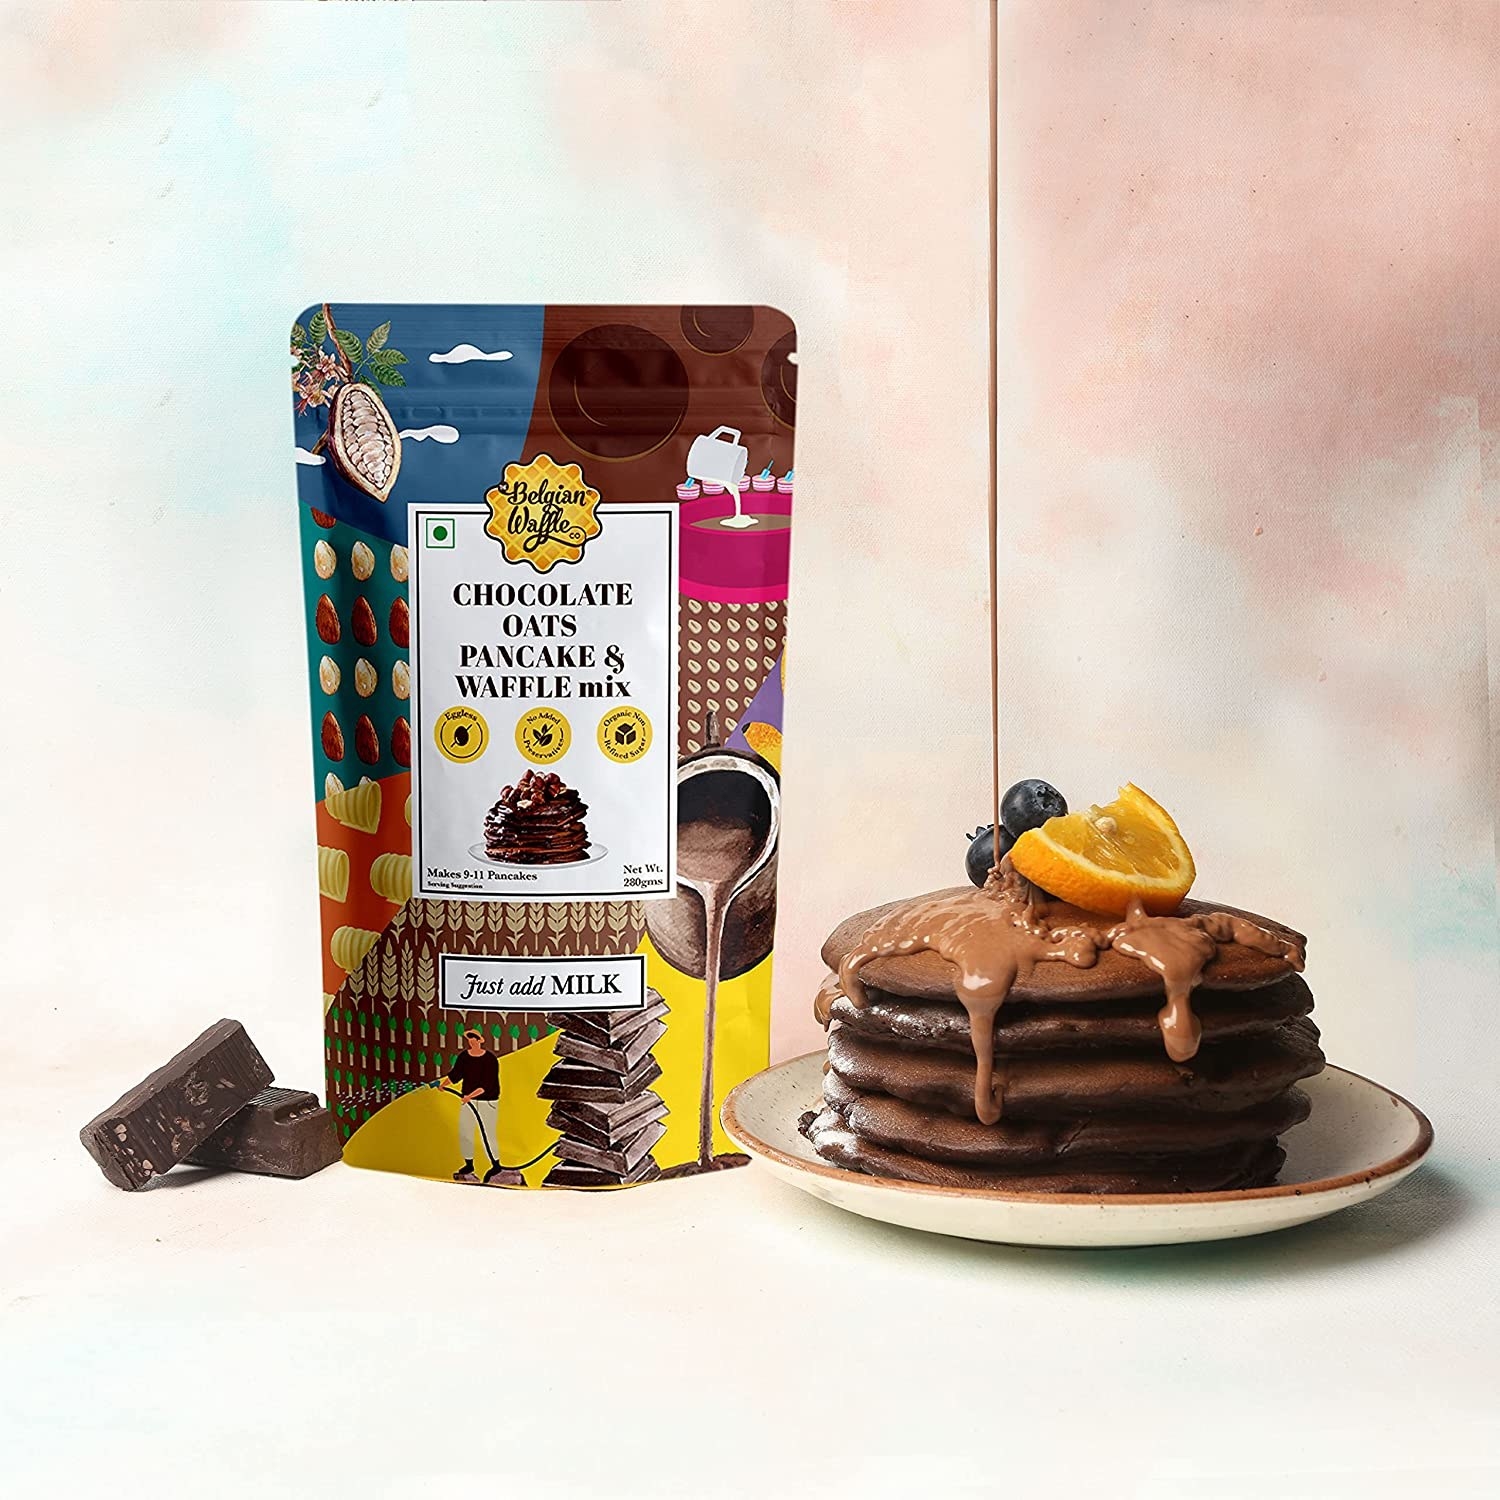 Packet of the Belgian chocolate pancakes next to the pancakes on a plate with chocolate being dripped over them